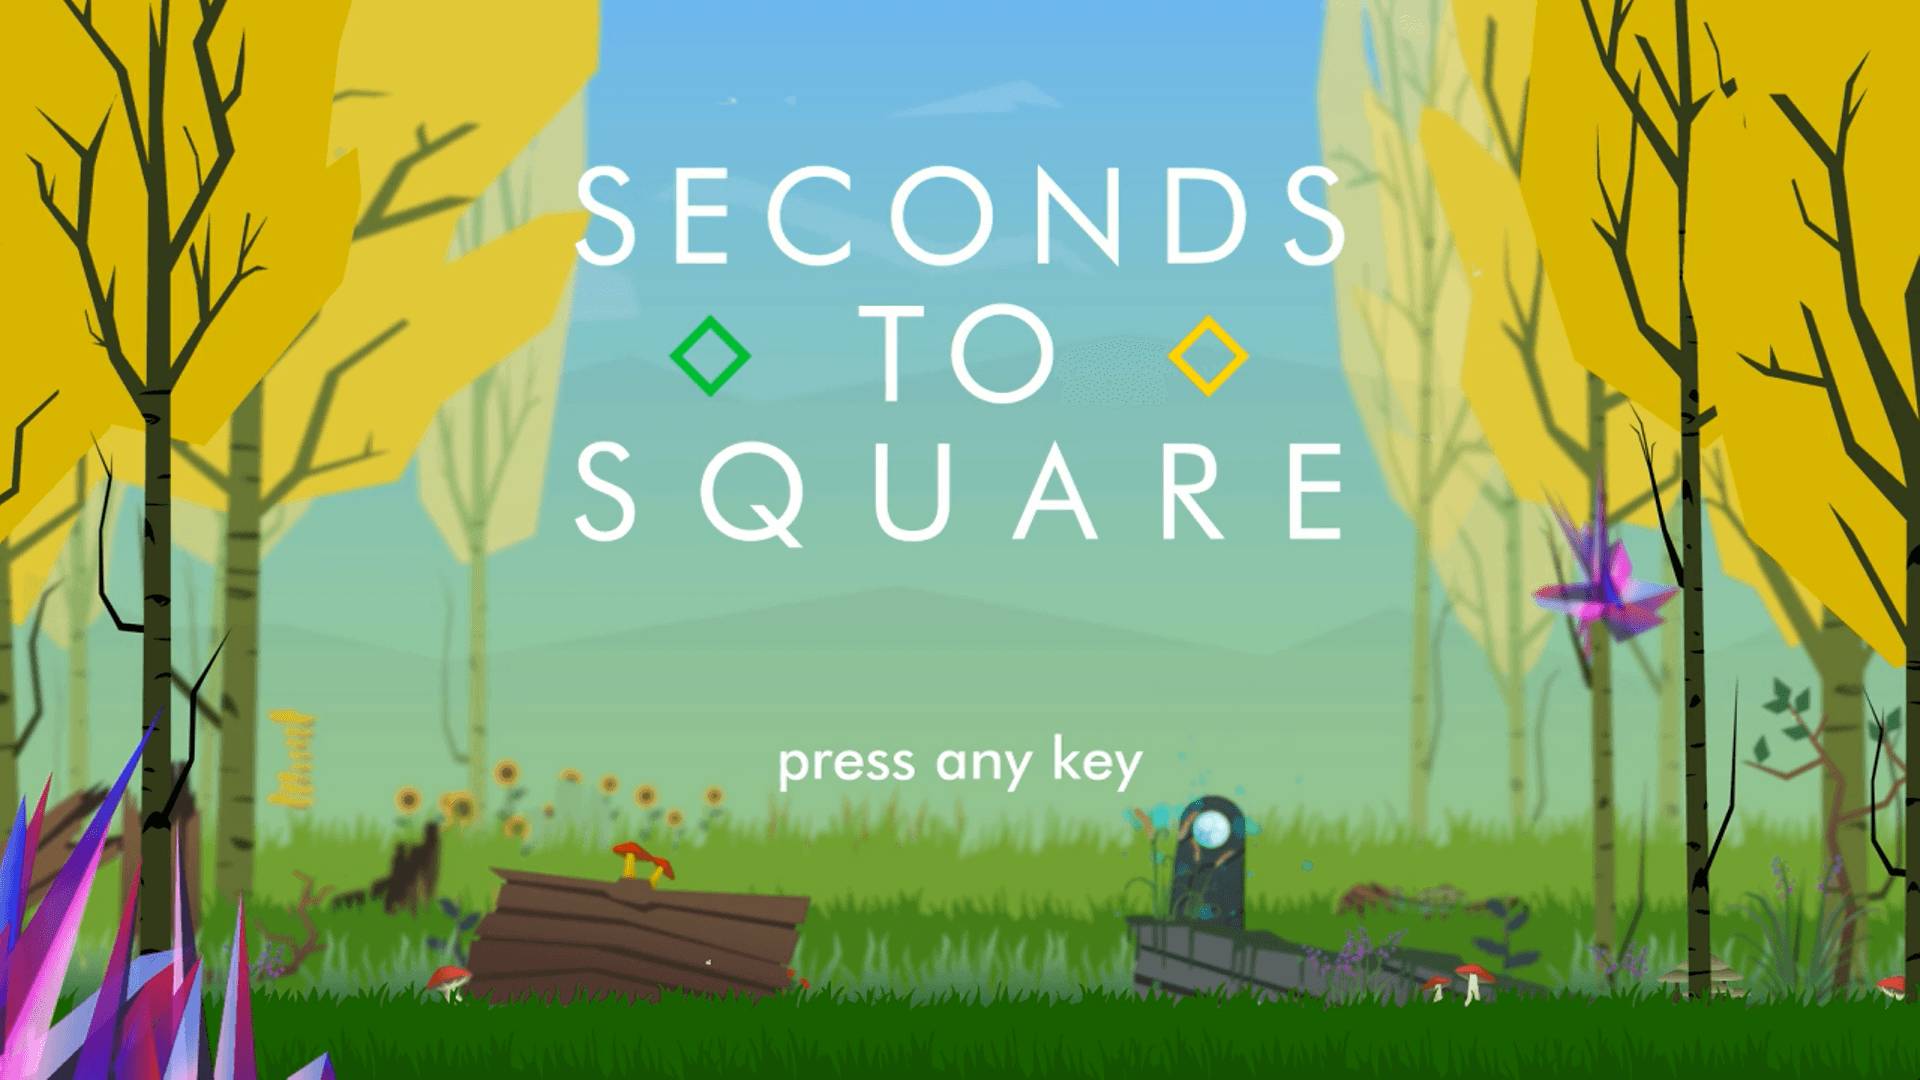 5 Seconds игра. 30 Seconds game. Steam Square. Square two. Find you 2 game